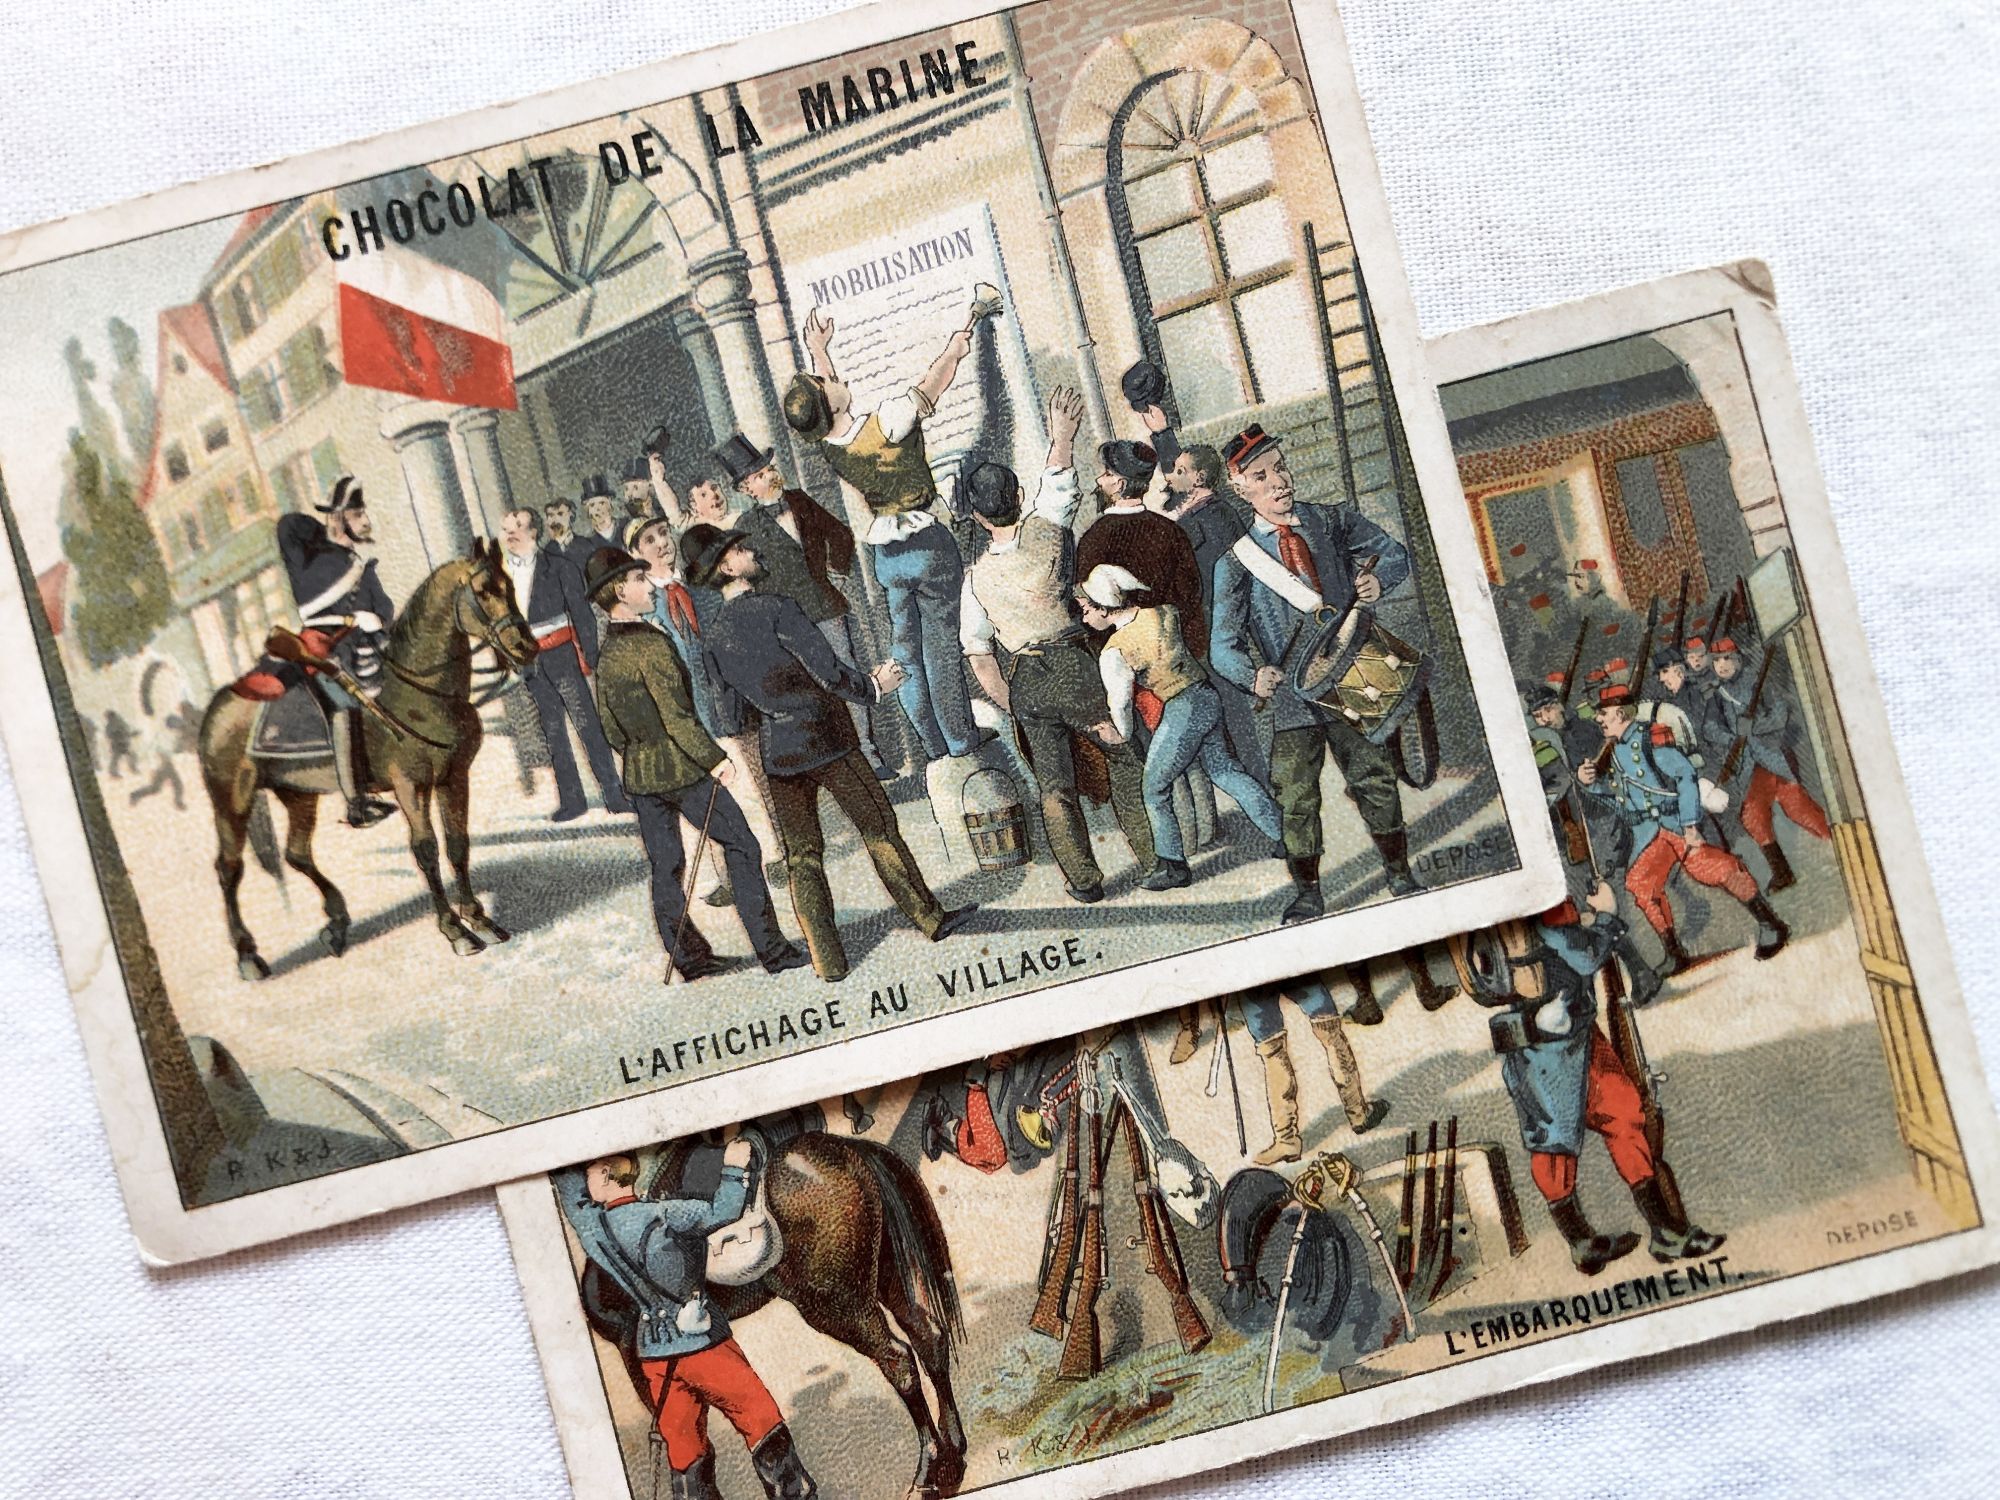 Two vintage French chromolithograph of the Chocolat de la Marine brand from 1910s